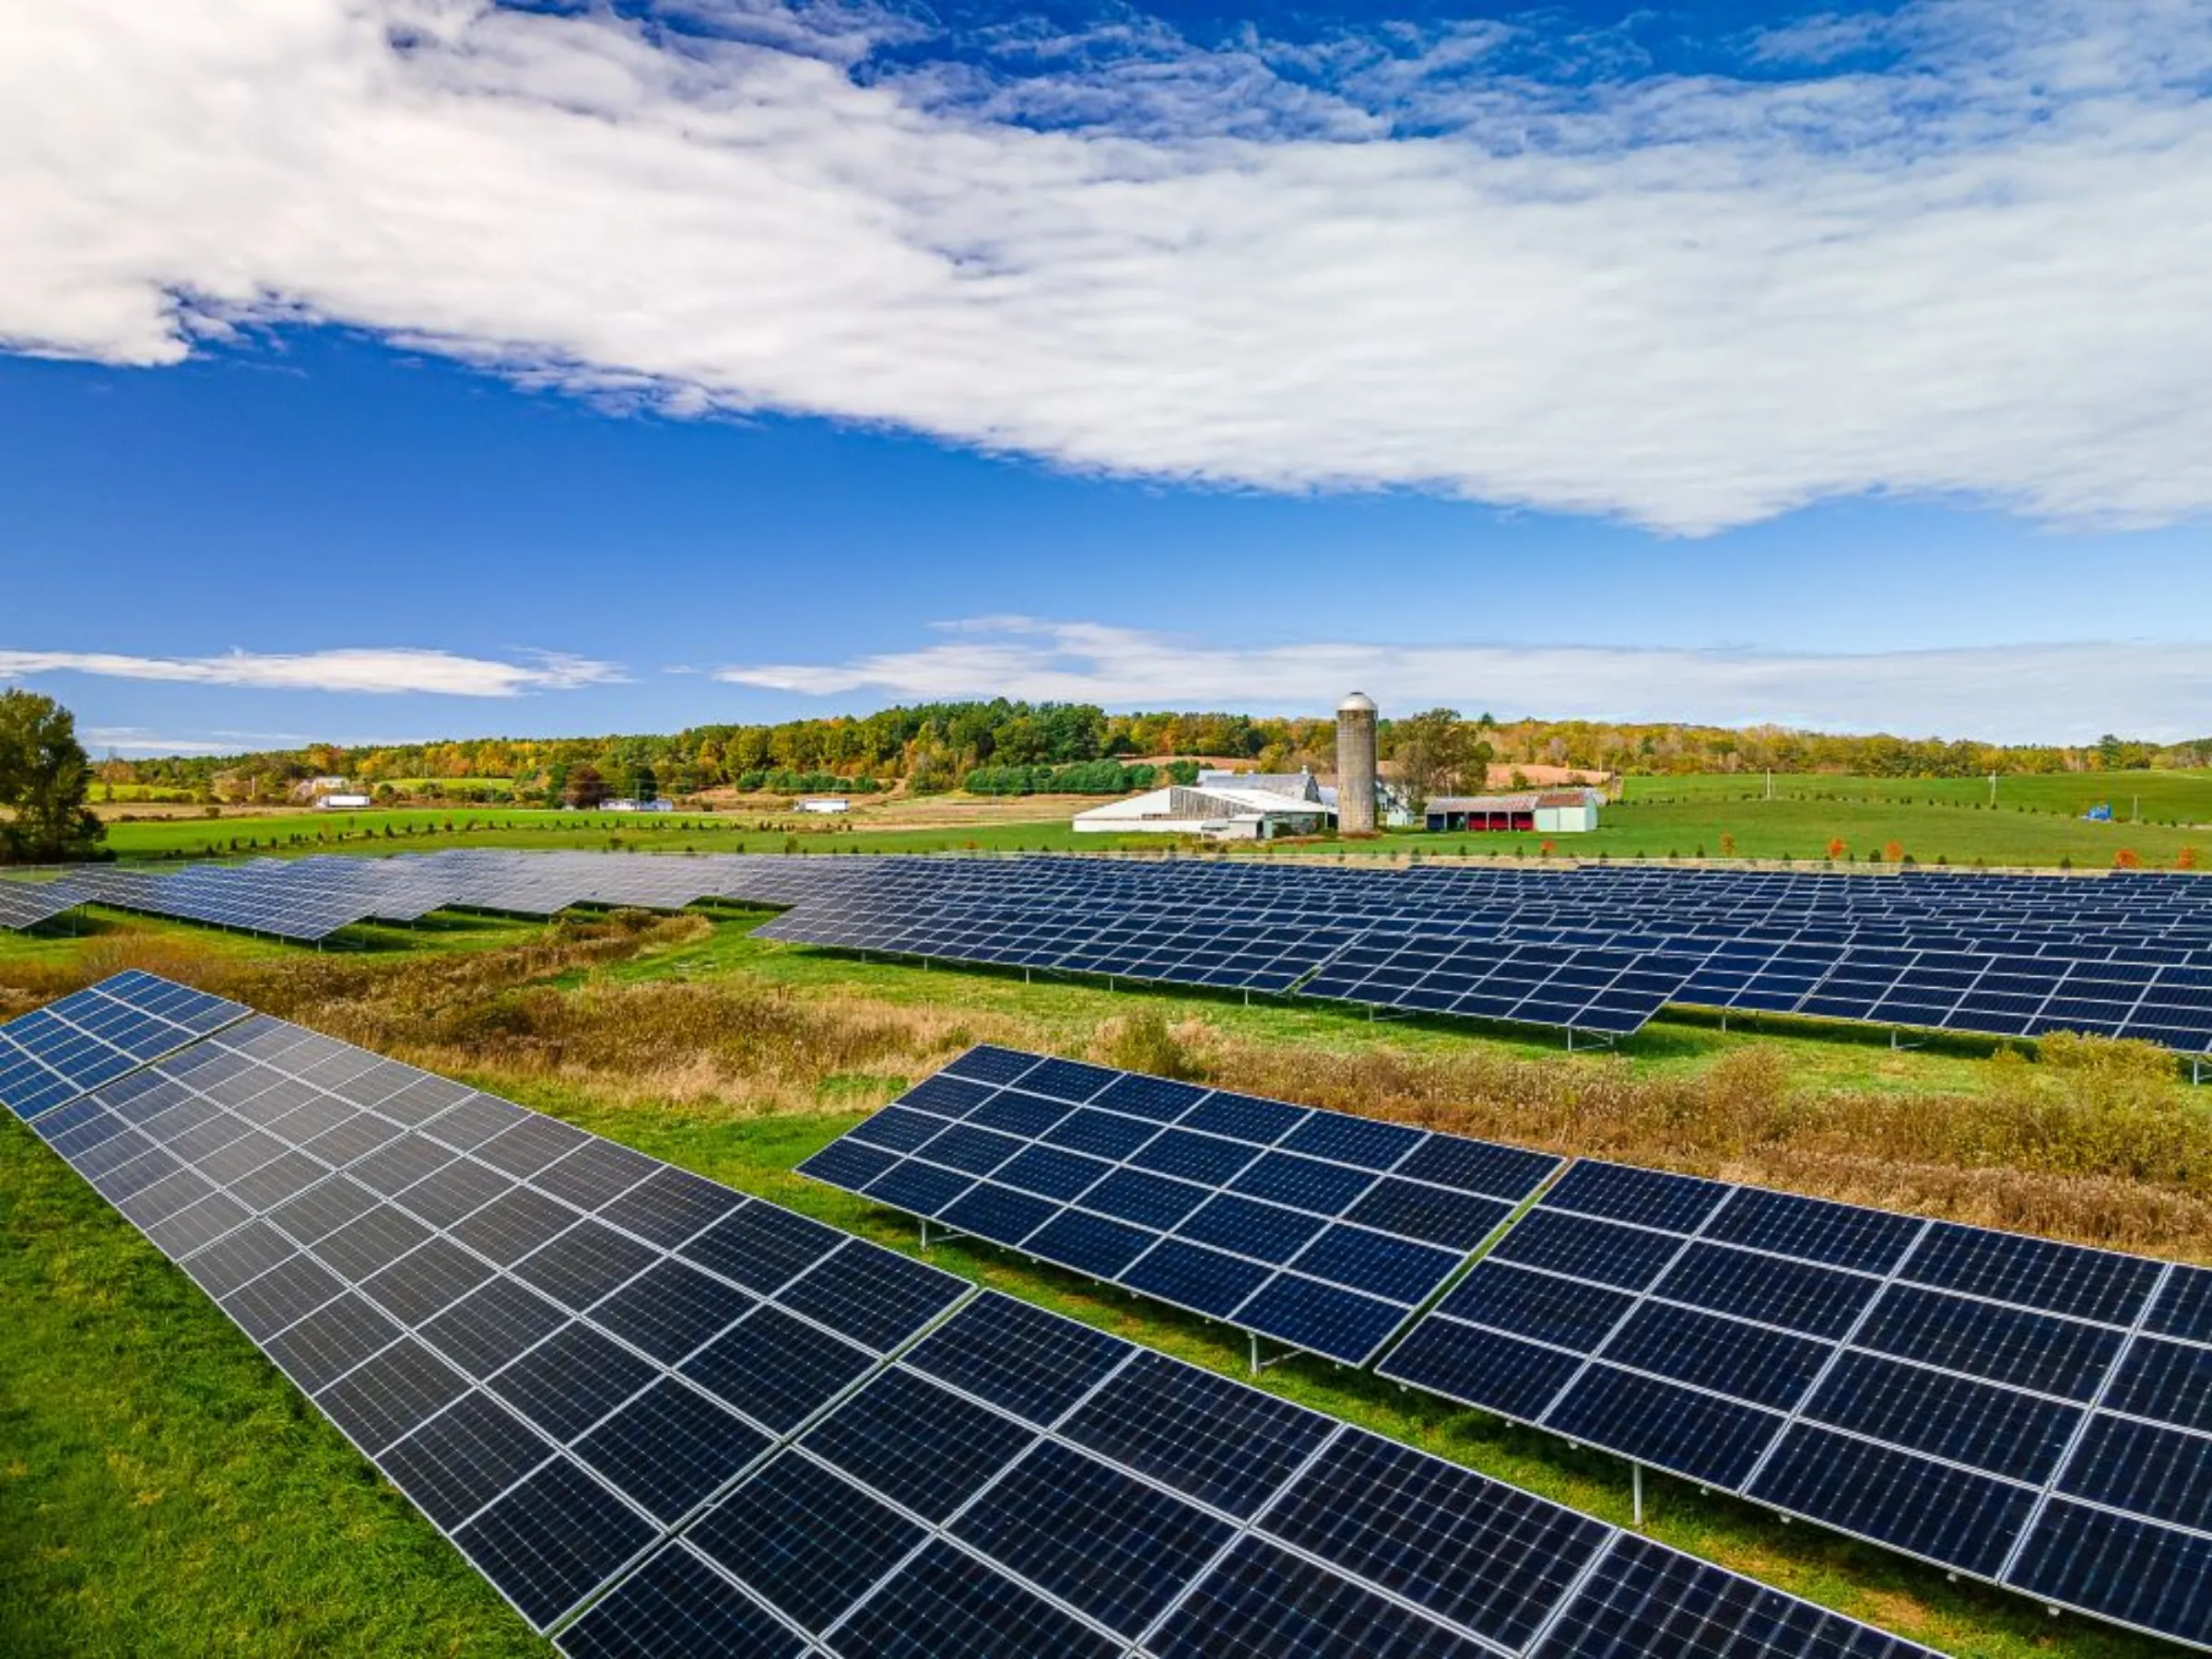 A community solar project in Gloversville, New York. October 19, 2021